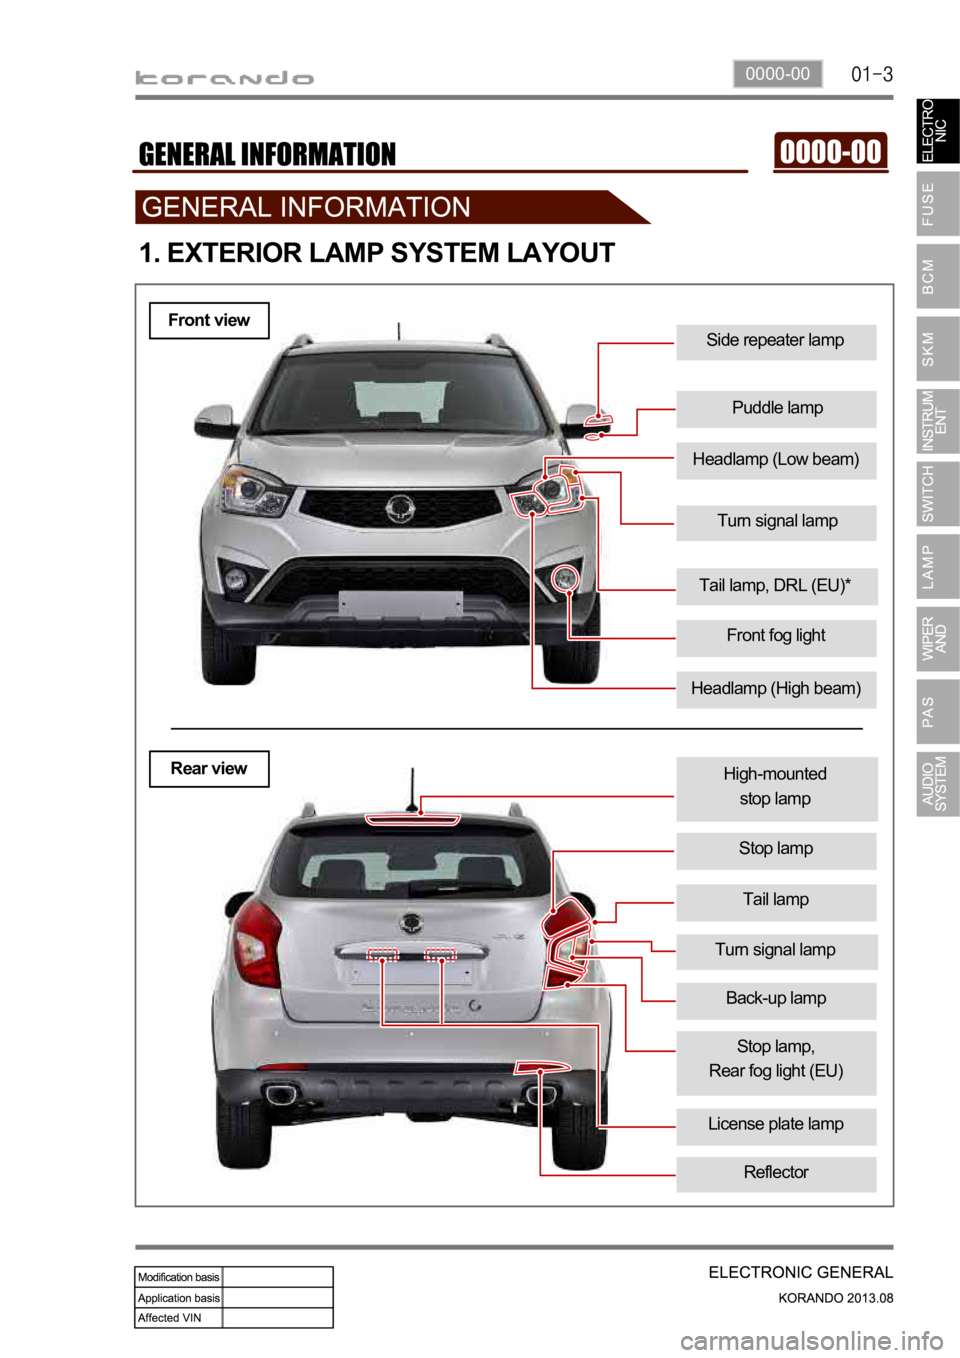 SSANGYONG KORANDO 2013  Service Manual 0000-00
Turn signal lamp
Side repeater lamp
Puddle lamp
1. EXTERIOR LAMP SYSTEM LAYOUT
Headlamp (High beam)
Tail lamp, DRL (EU)*
Front fog light
Tail lamp
High-mounted 
stop lamp
Stop lamp
License pla